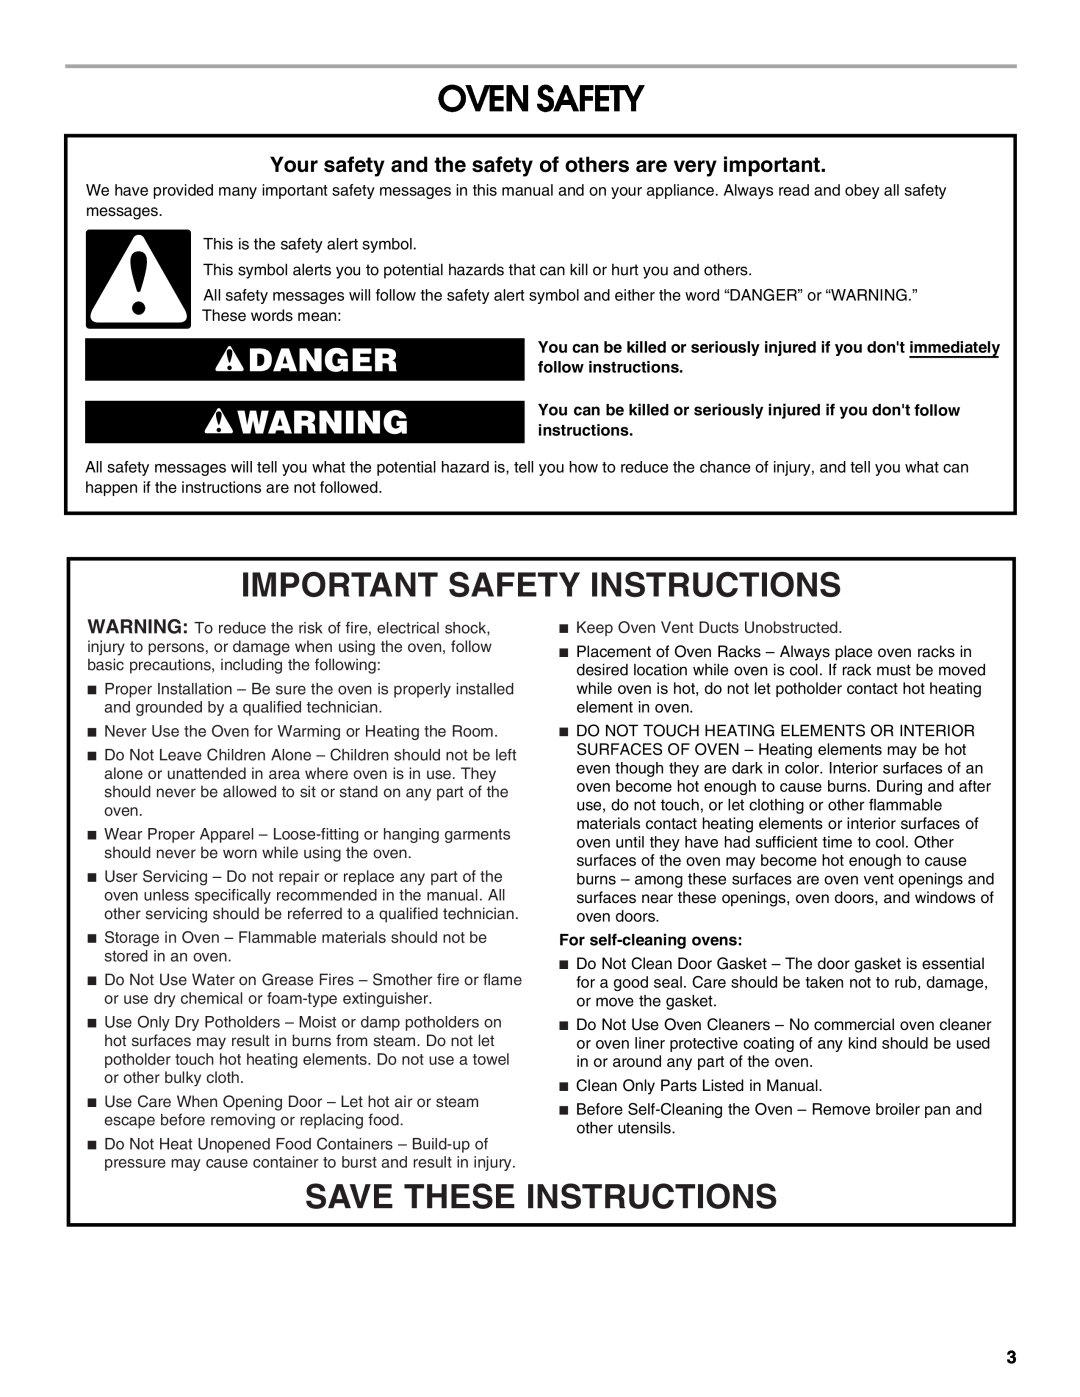 Whirlpool IBS330P Oven Safety, Important Safety Instructions, Save These Instructions, Danger, For self-cleaning ovens 